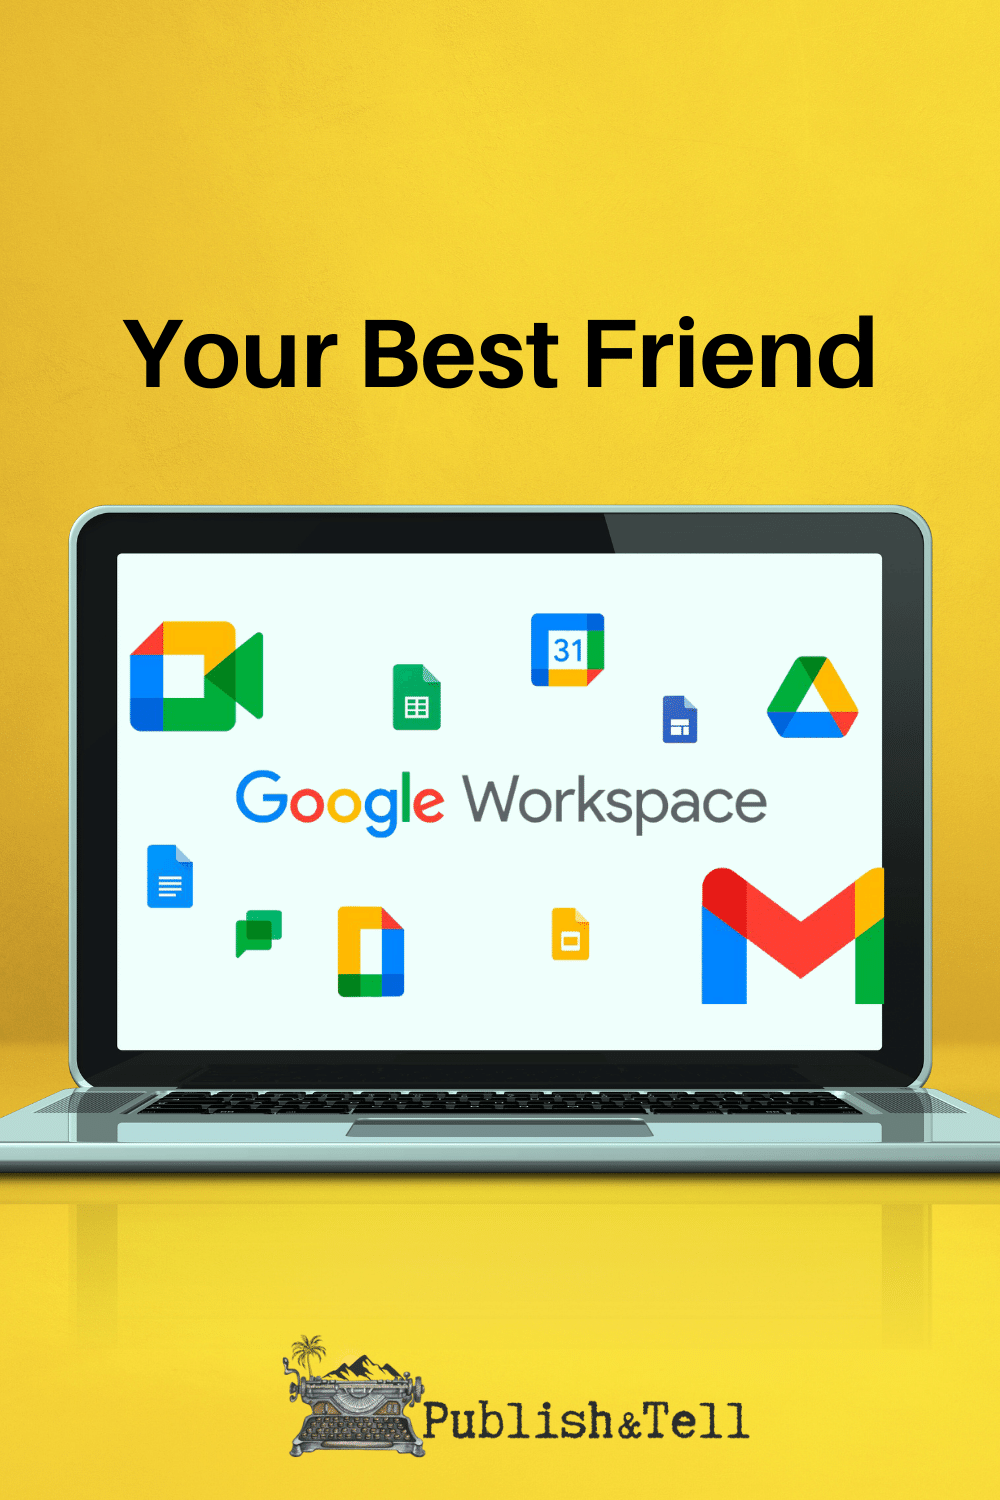 The Google Workspace is Your Best Friend